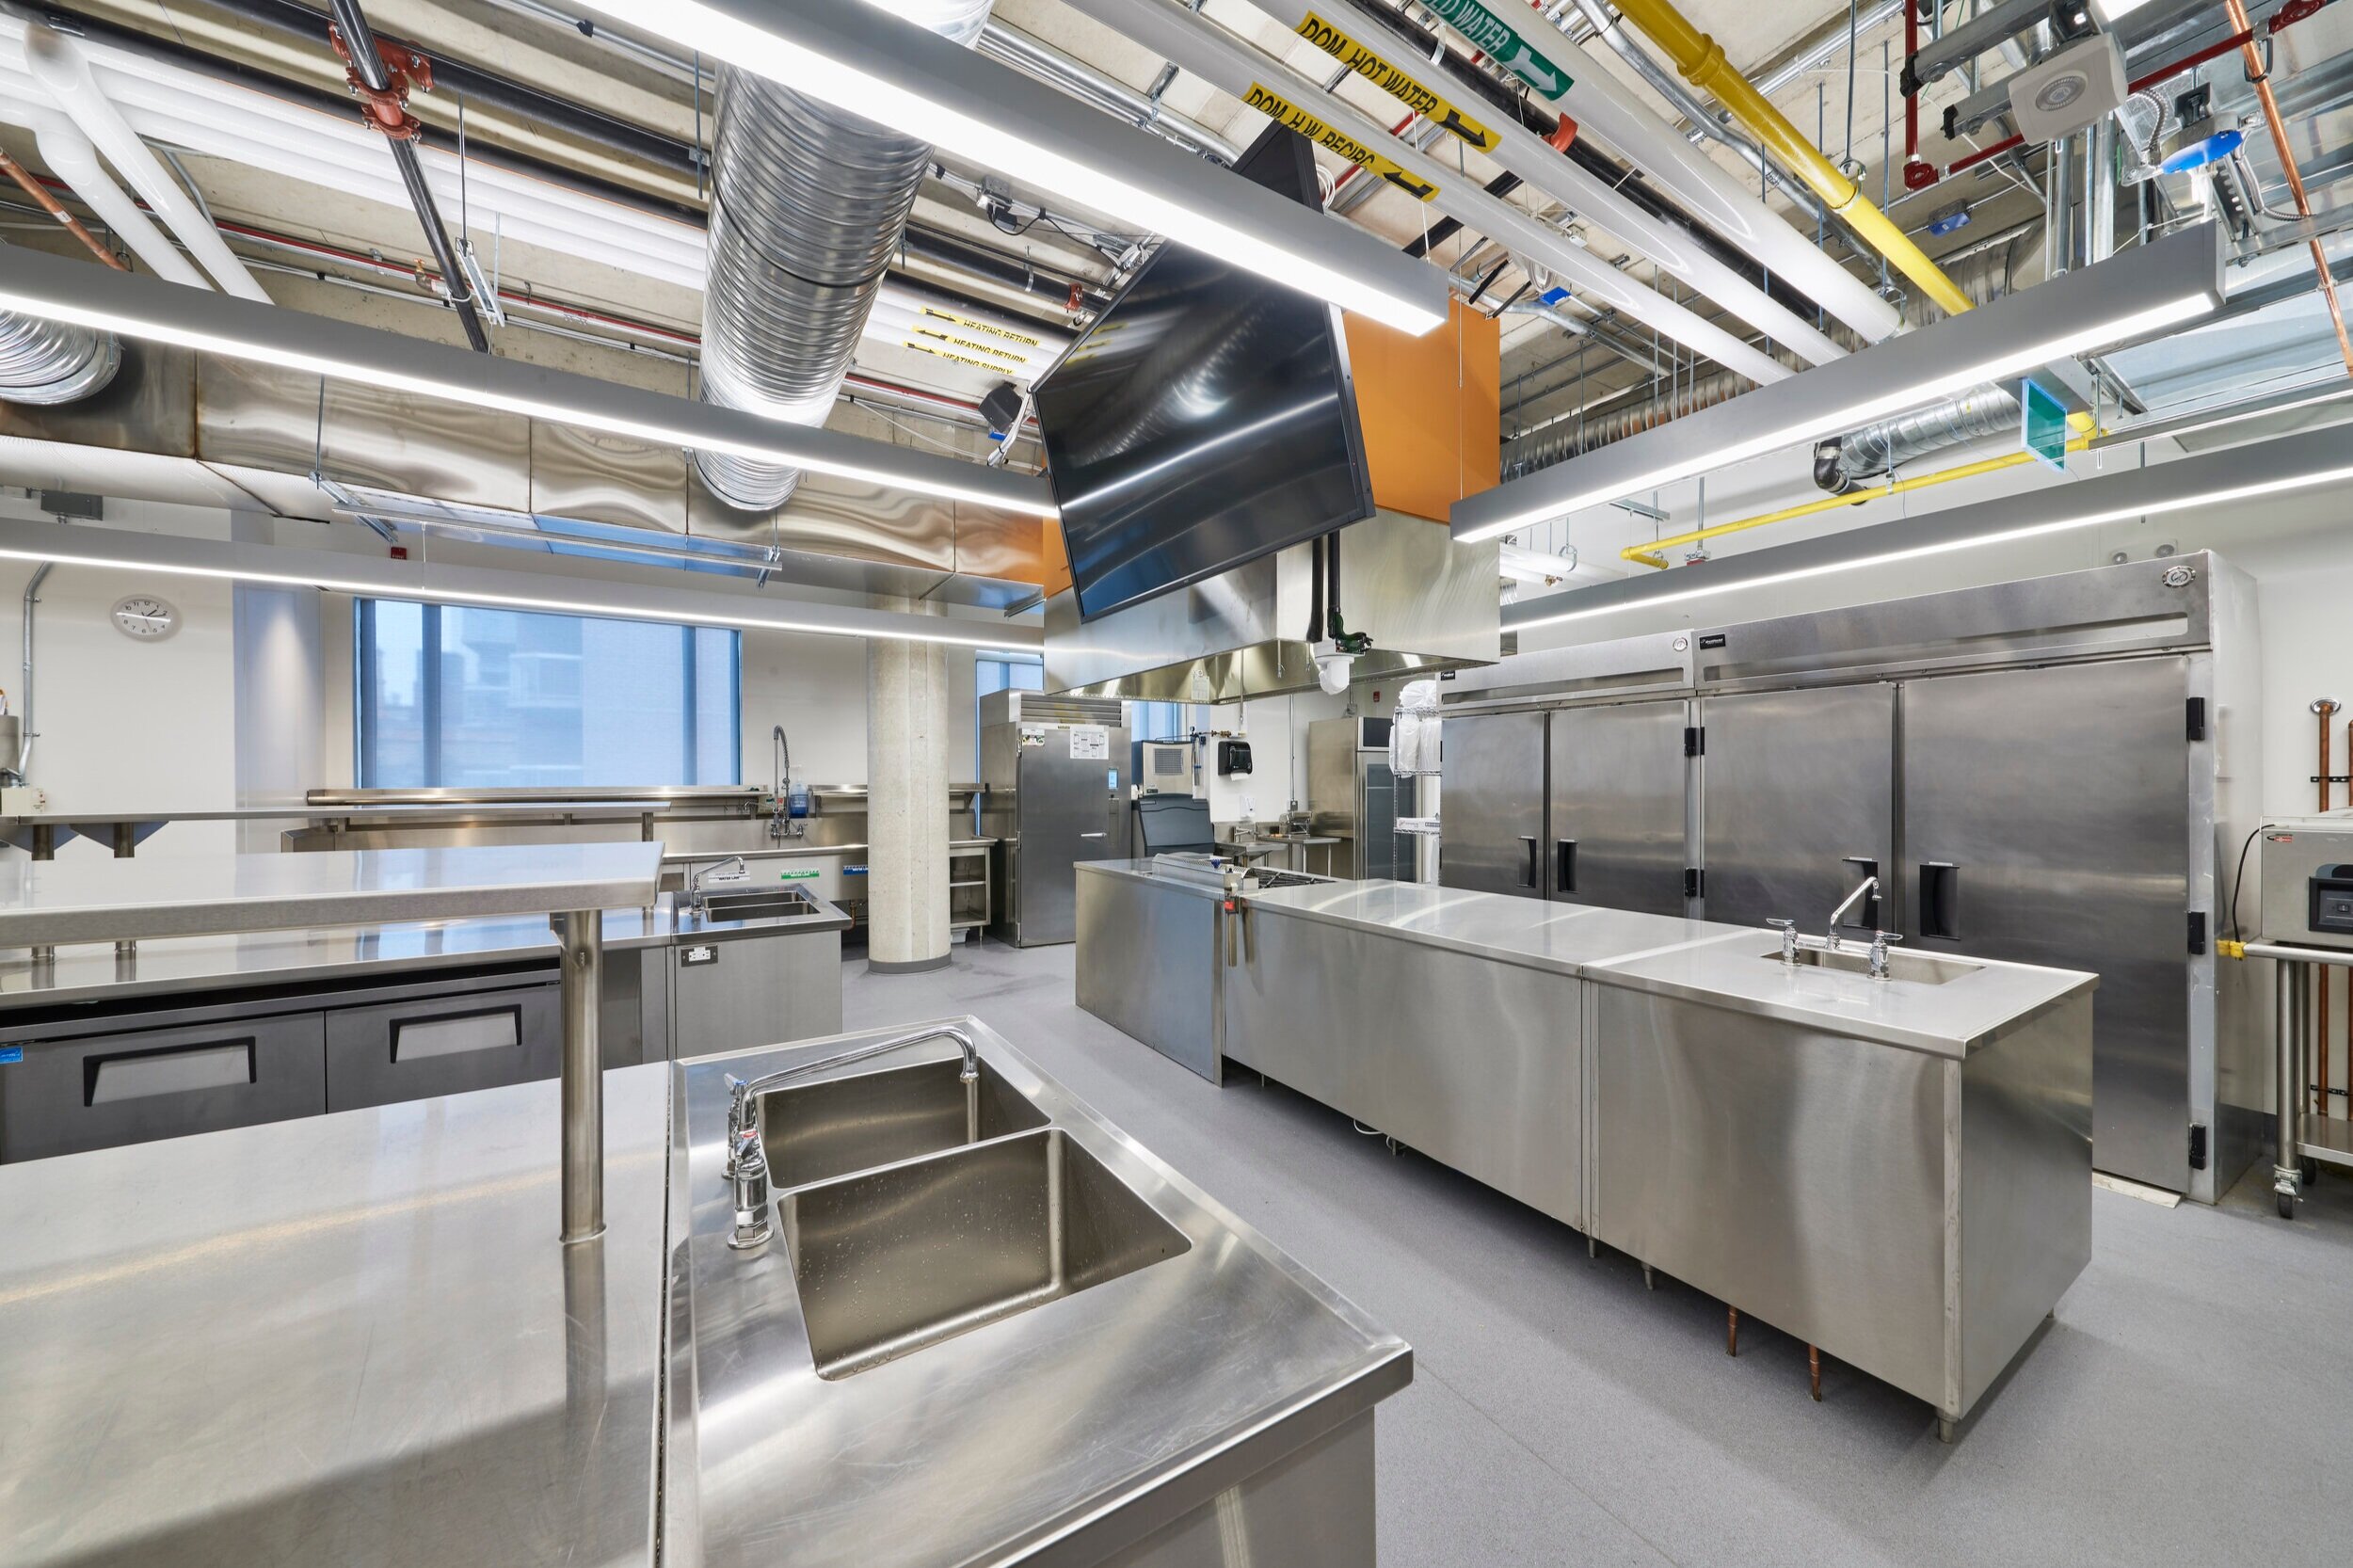 Fourth alternate view of a Culinary Kitchen Lab at the Centre for Hospitality &amp; Culinary Arts at George Brown College